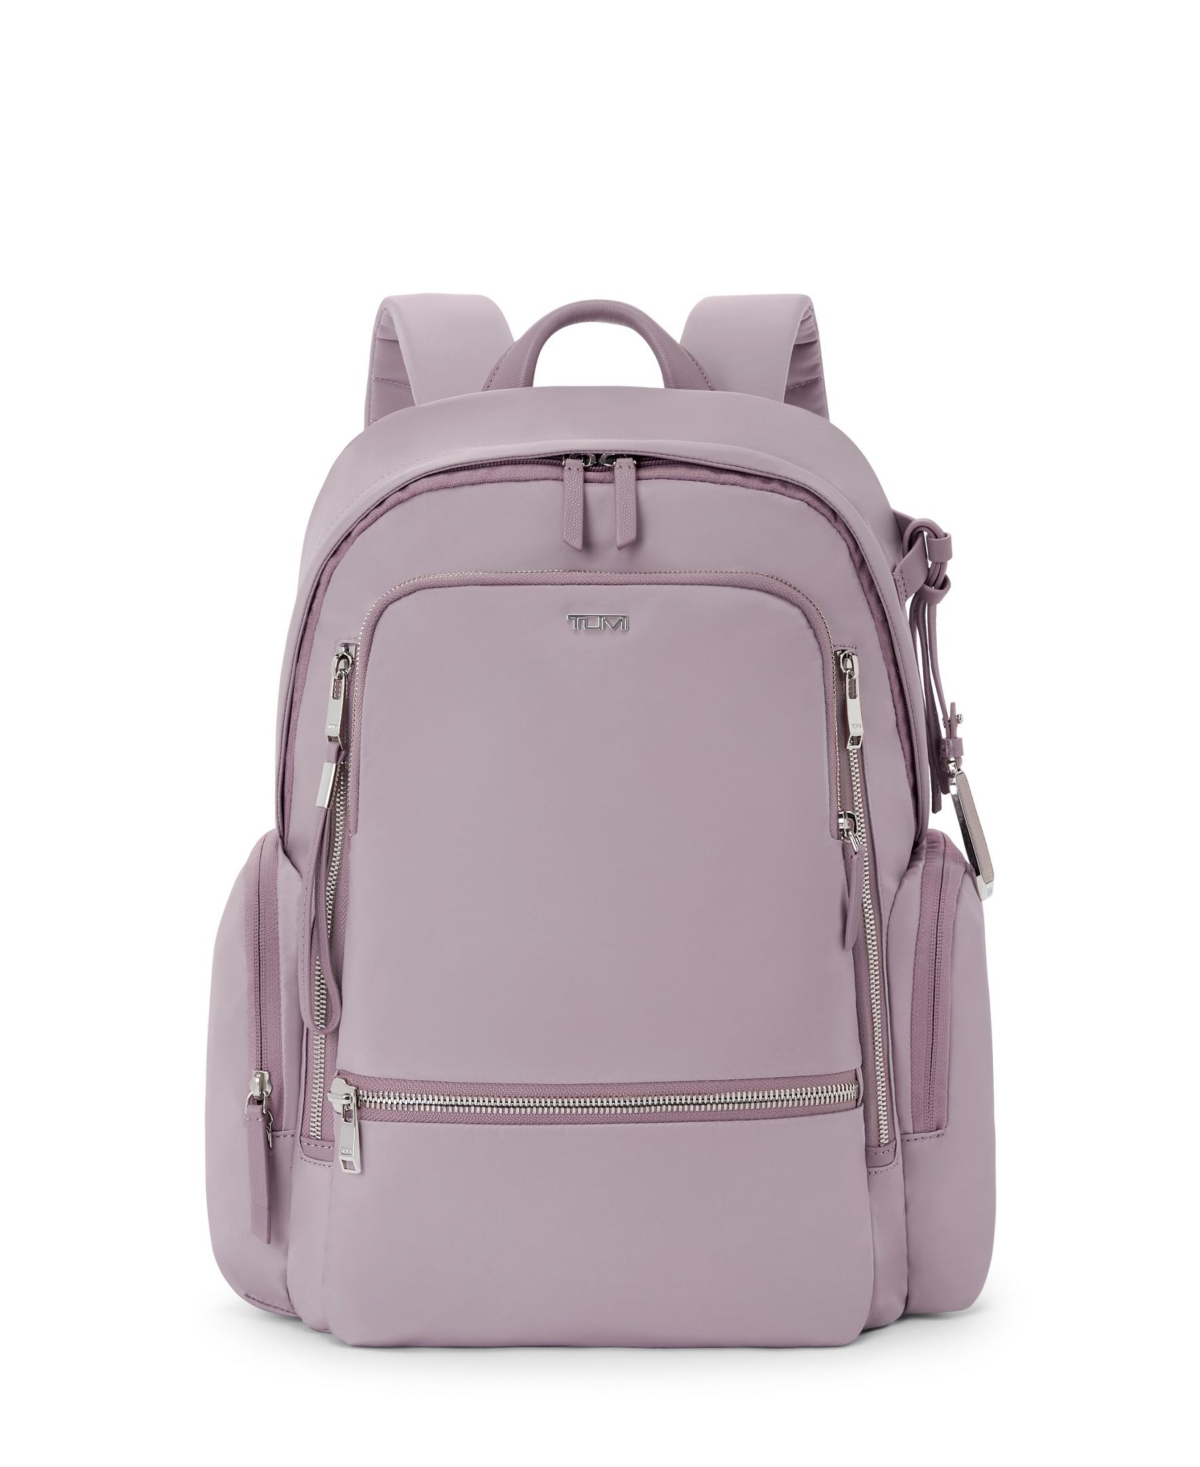 Tumi Voyageur Celina Backpack In Lilac